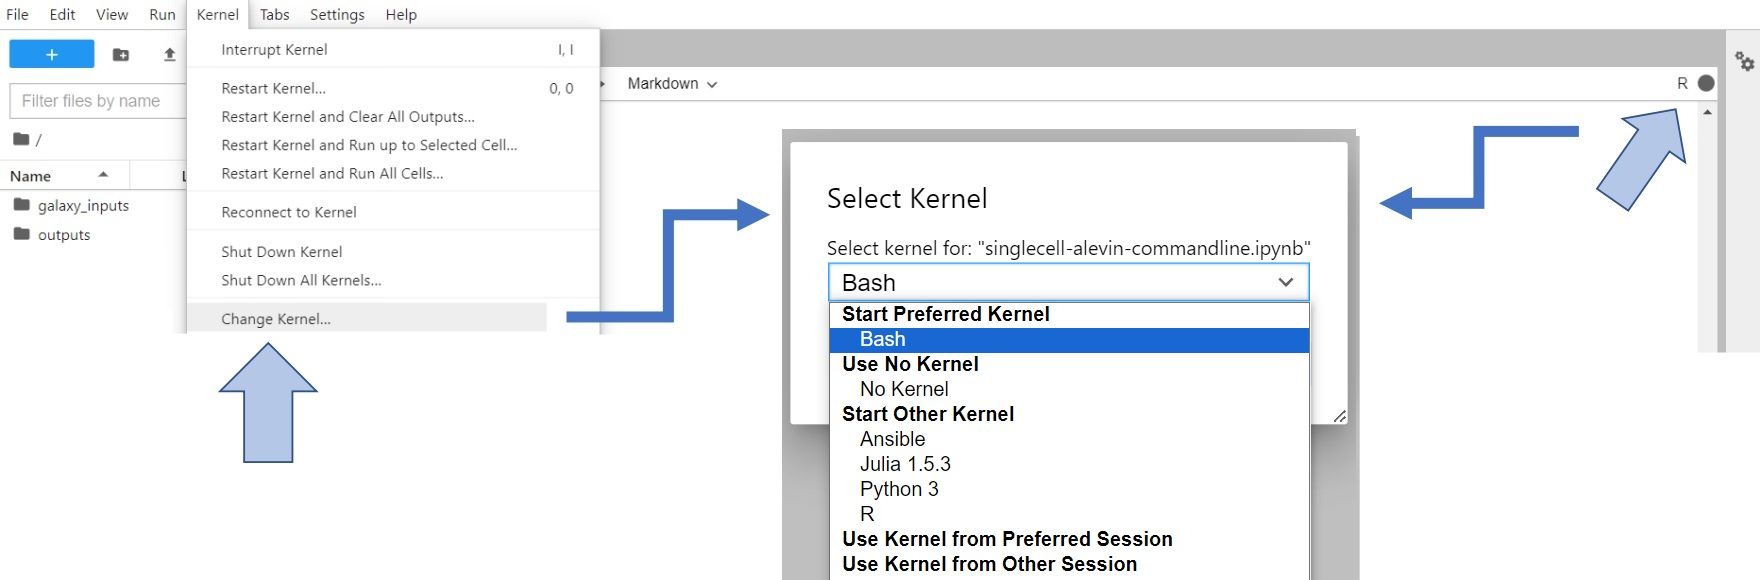 Figure showing the JupyterLab interface with an arrow pointing to the left corner, showing the option 'Kernel' -> 'Change Kernel...' and another arrow pointing to the right corner, showing the icon of the current kernel. The pop-up window asks which kernel should be chosen instead.